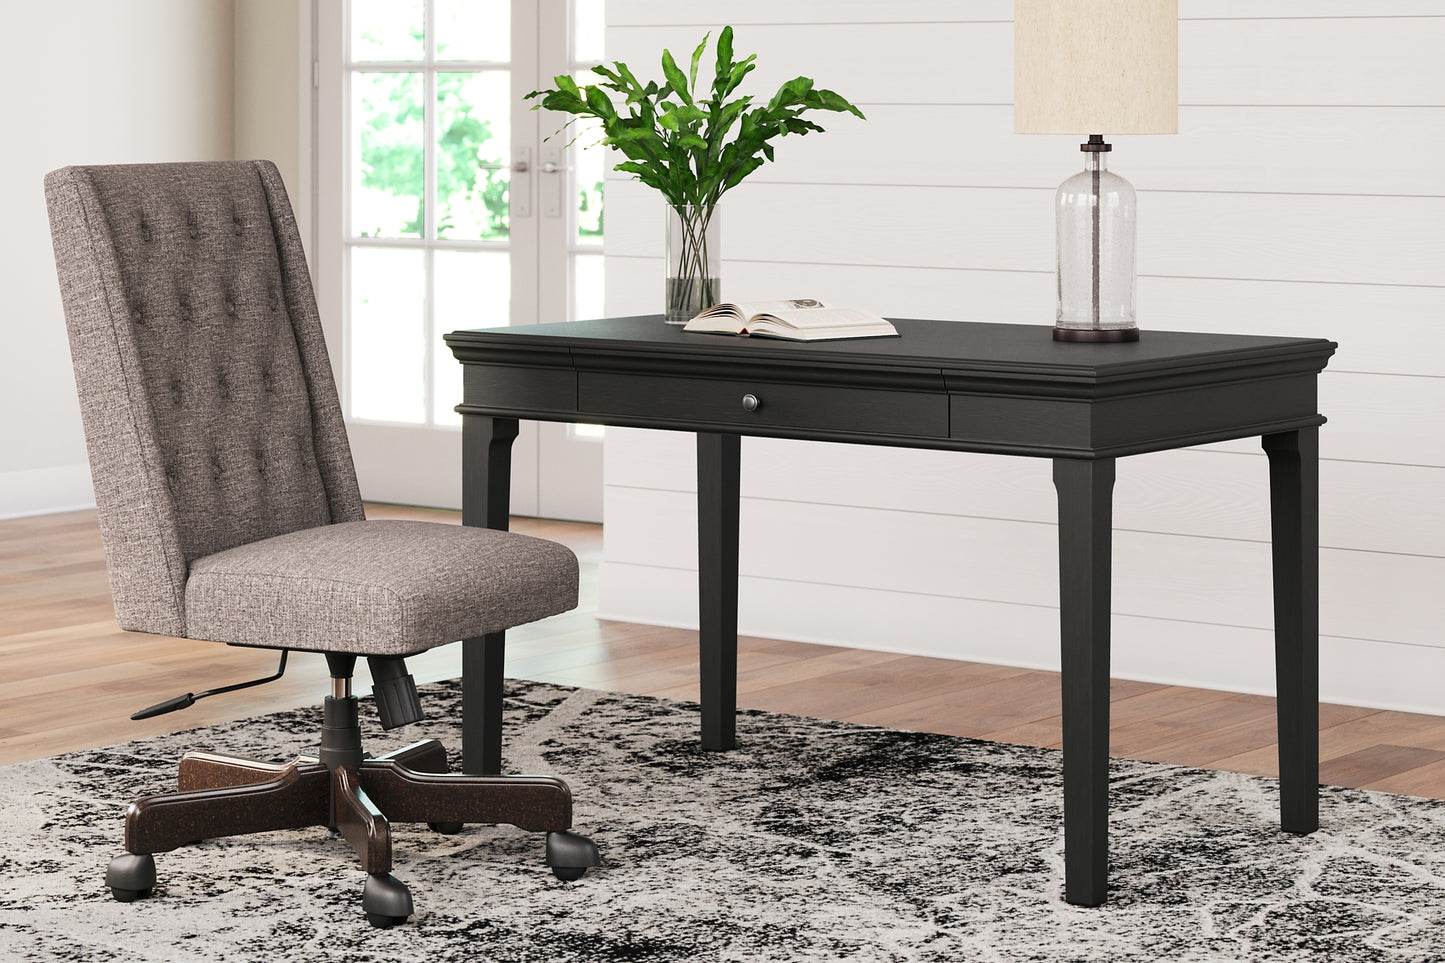 Beckincreek Home Office Small Leg Desk Signature Design by Ashley®